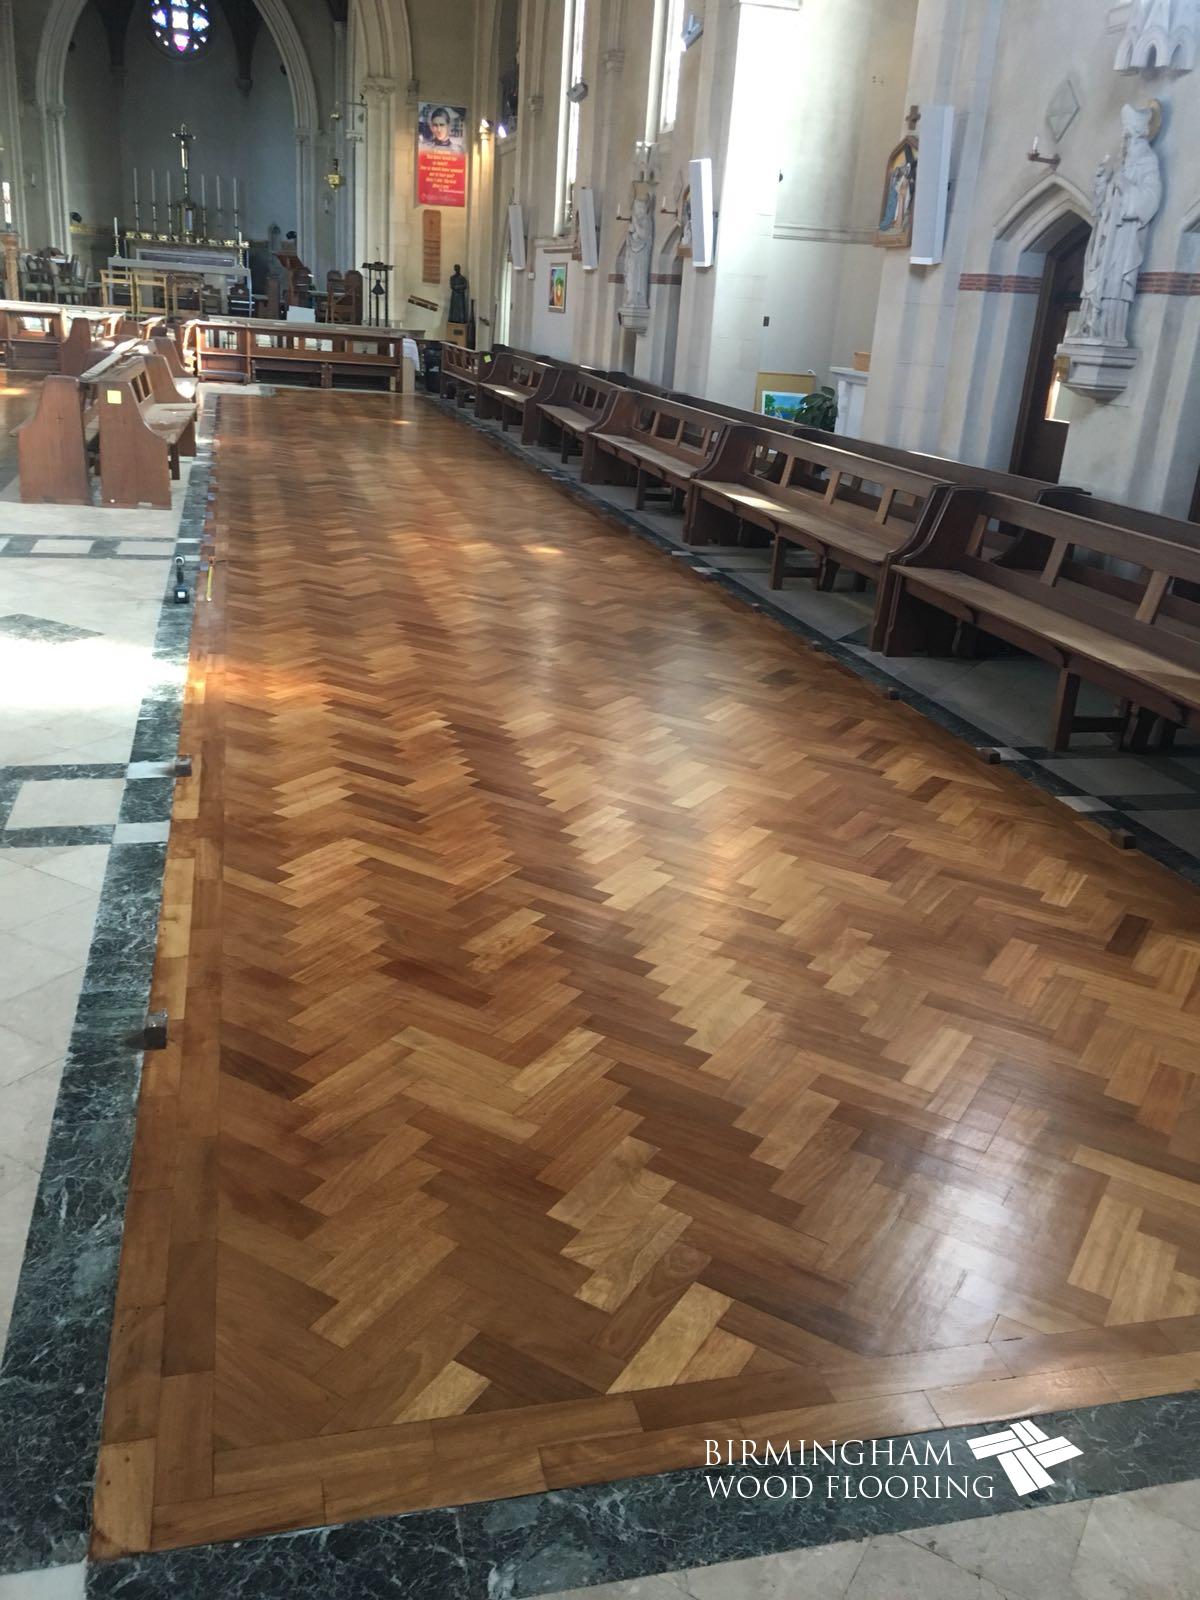 Church Floor Sanding and Sealing, Olton Friary, Solihull